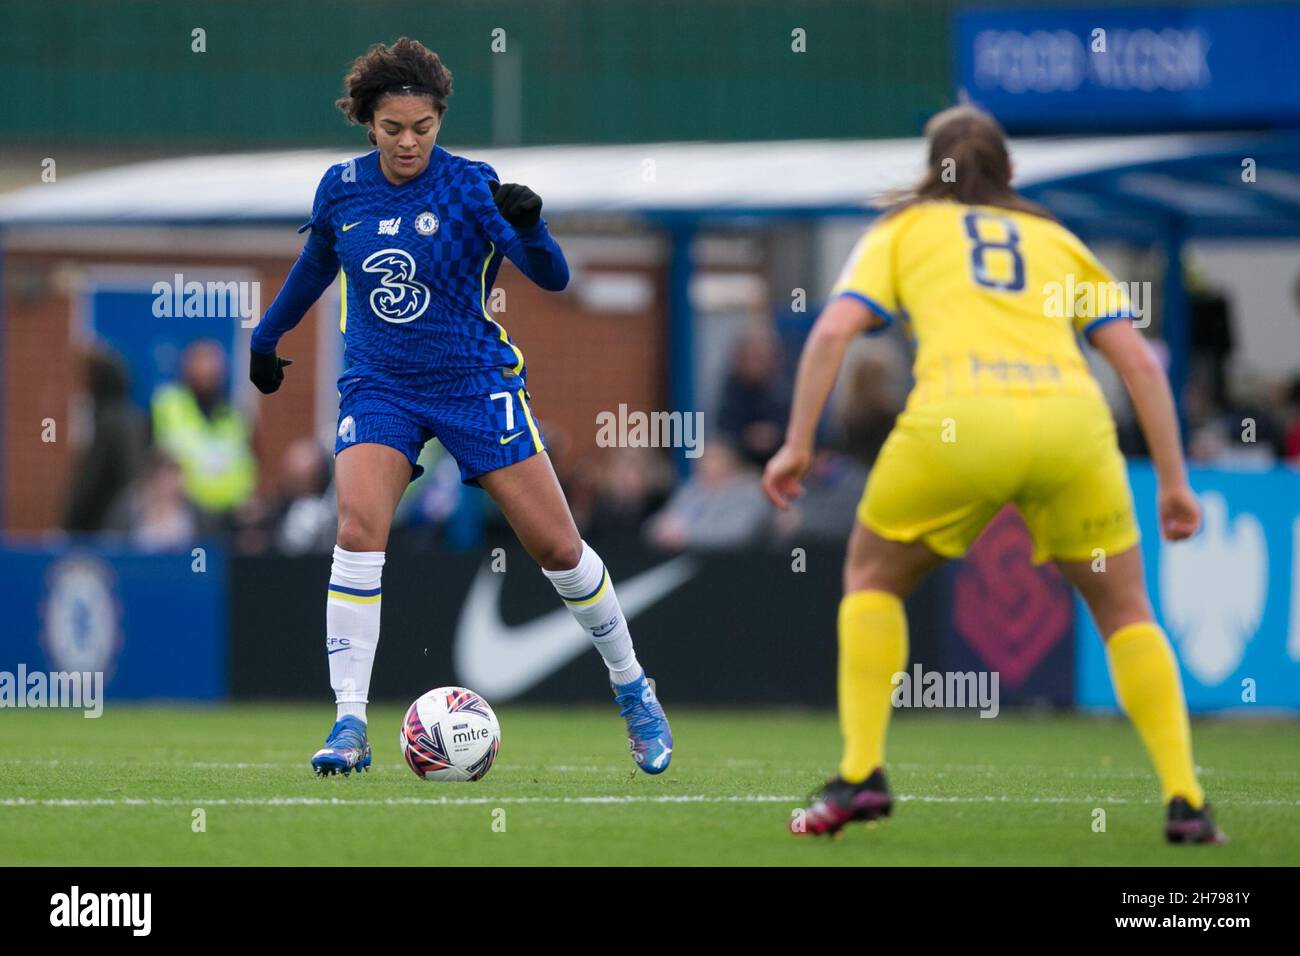 London, UK. 21st Nov, 2021. LONDON, UK. NOVEMBER 21ST : Jessica Carter of Chelsea FC controls the ball during the 2021-22 FA Womens Superleague fixture between Chelsea FC and Birmingham City at Kingsmeadow. Credit: Federico Guerra Morán/Alamy Live News Stock Photo